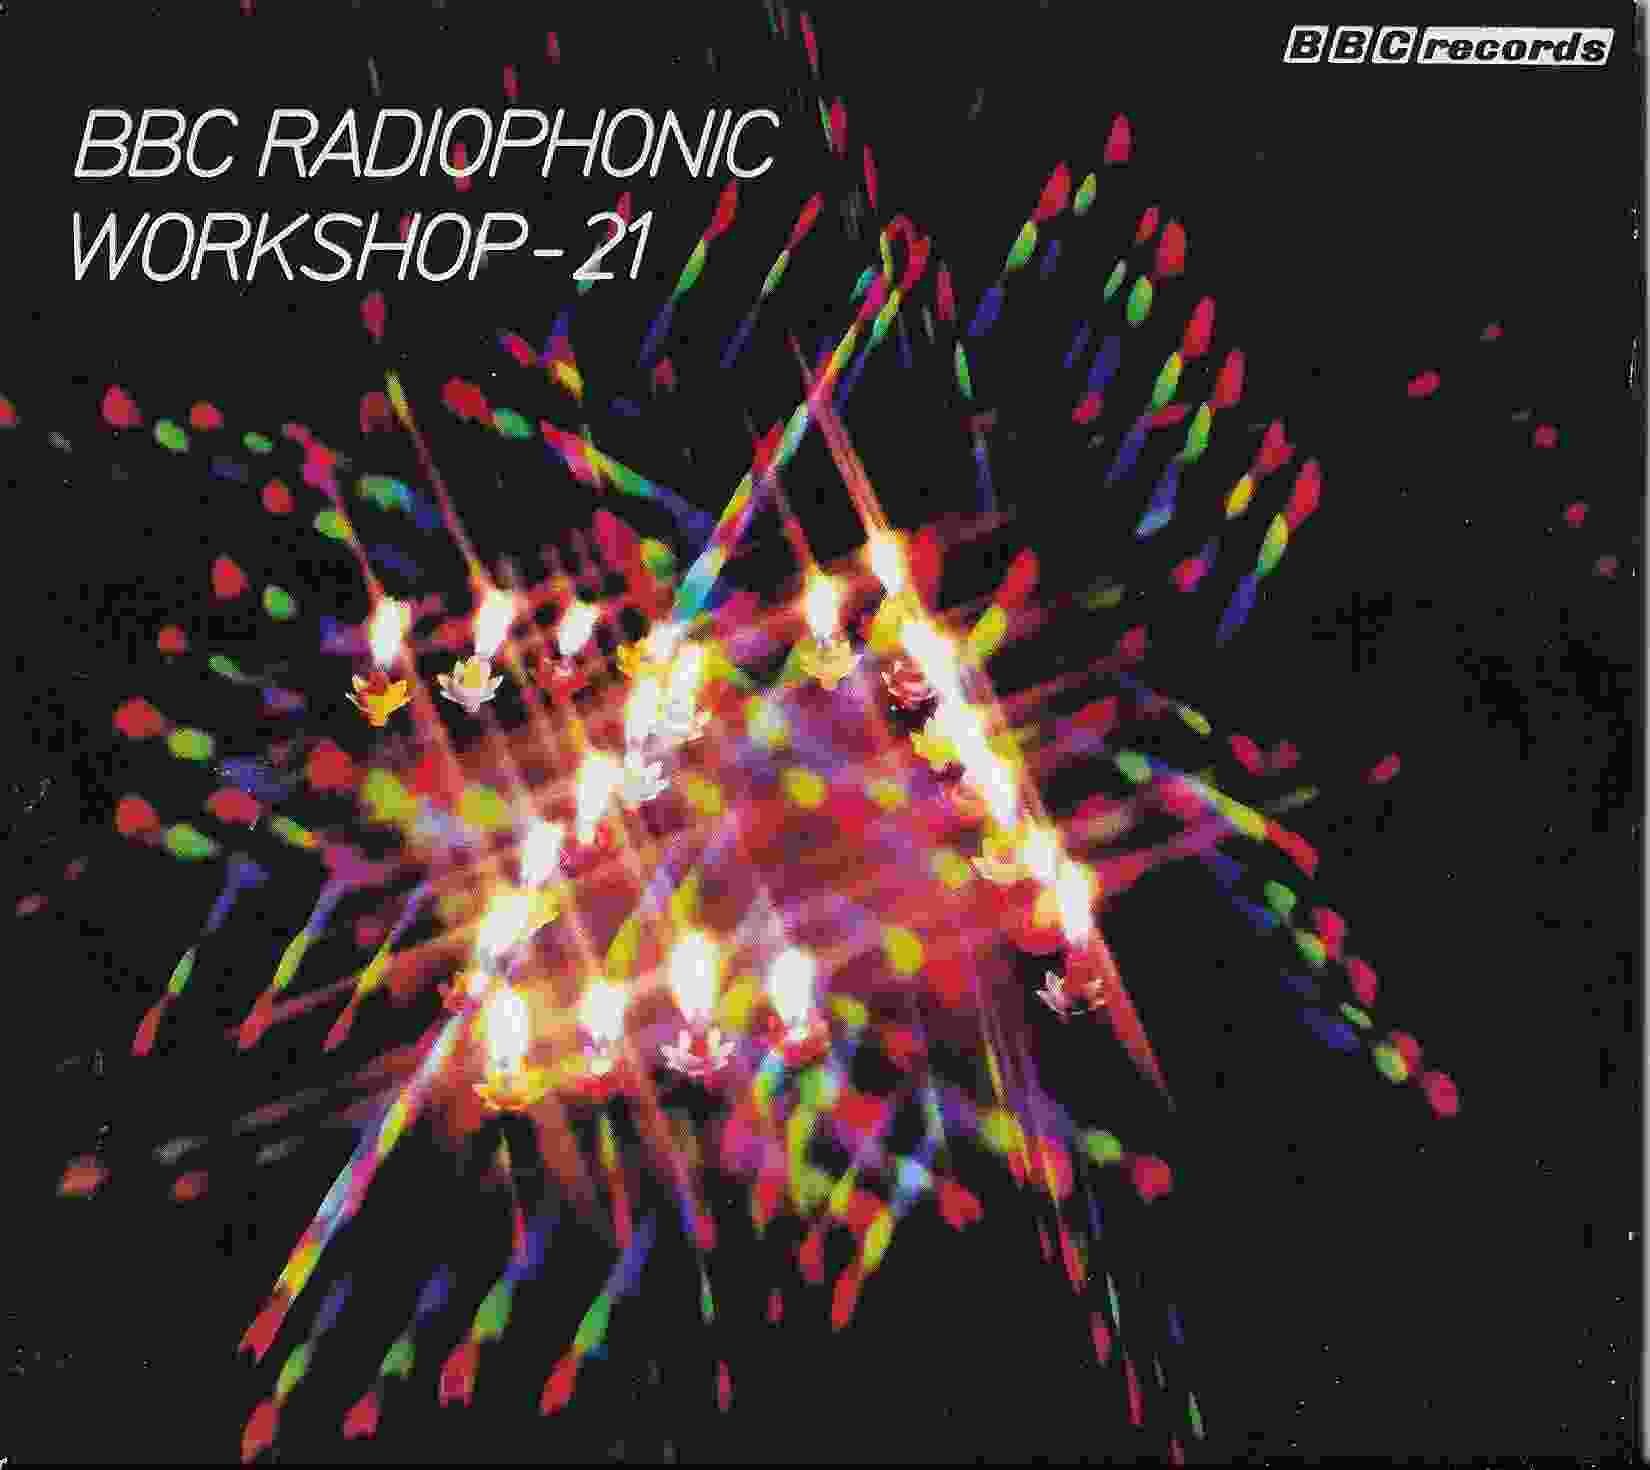 Picture of SILCD 1503 BBC Radiophonic Workshop - 21 by artist BBC Radiophonic Workshop from the BBC cds - Records and Tapes library